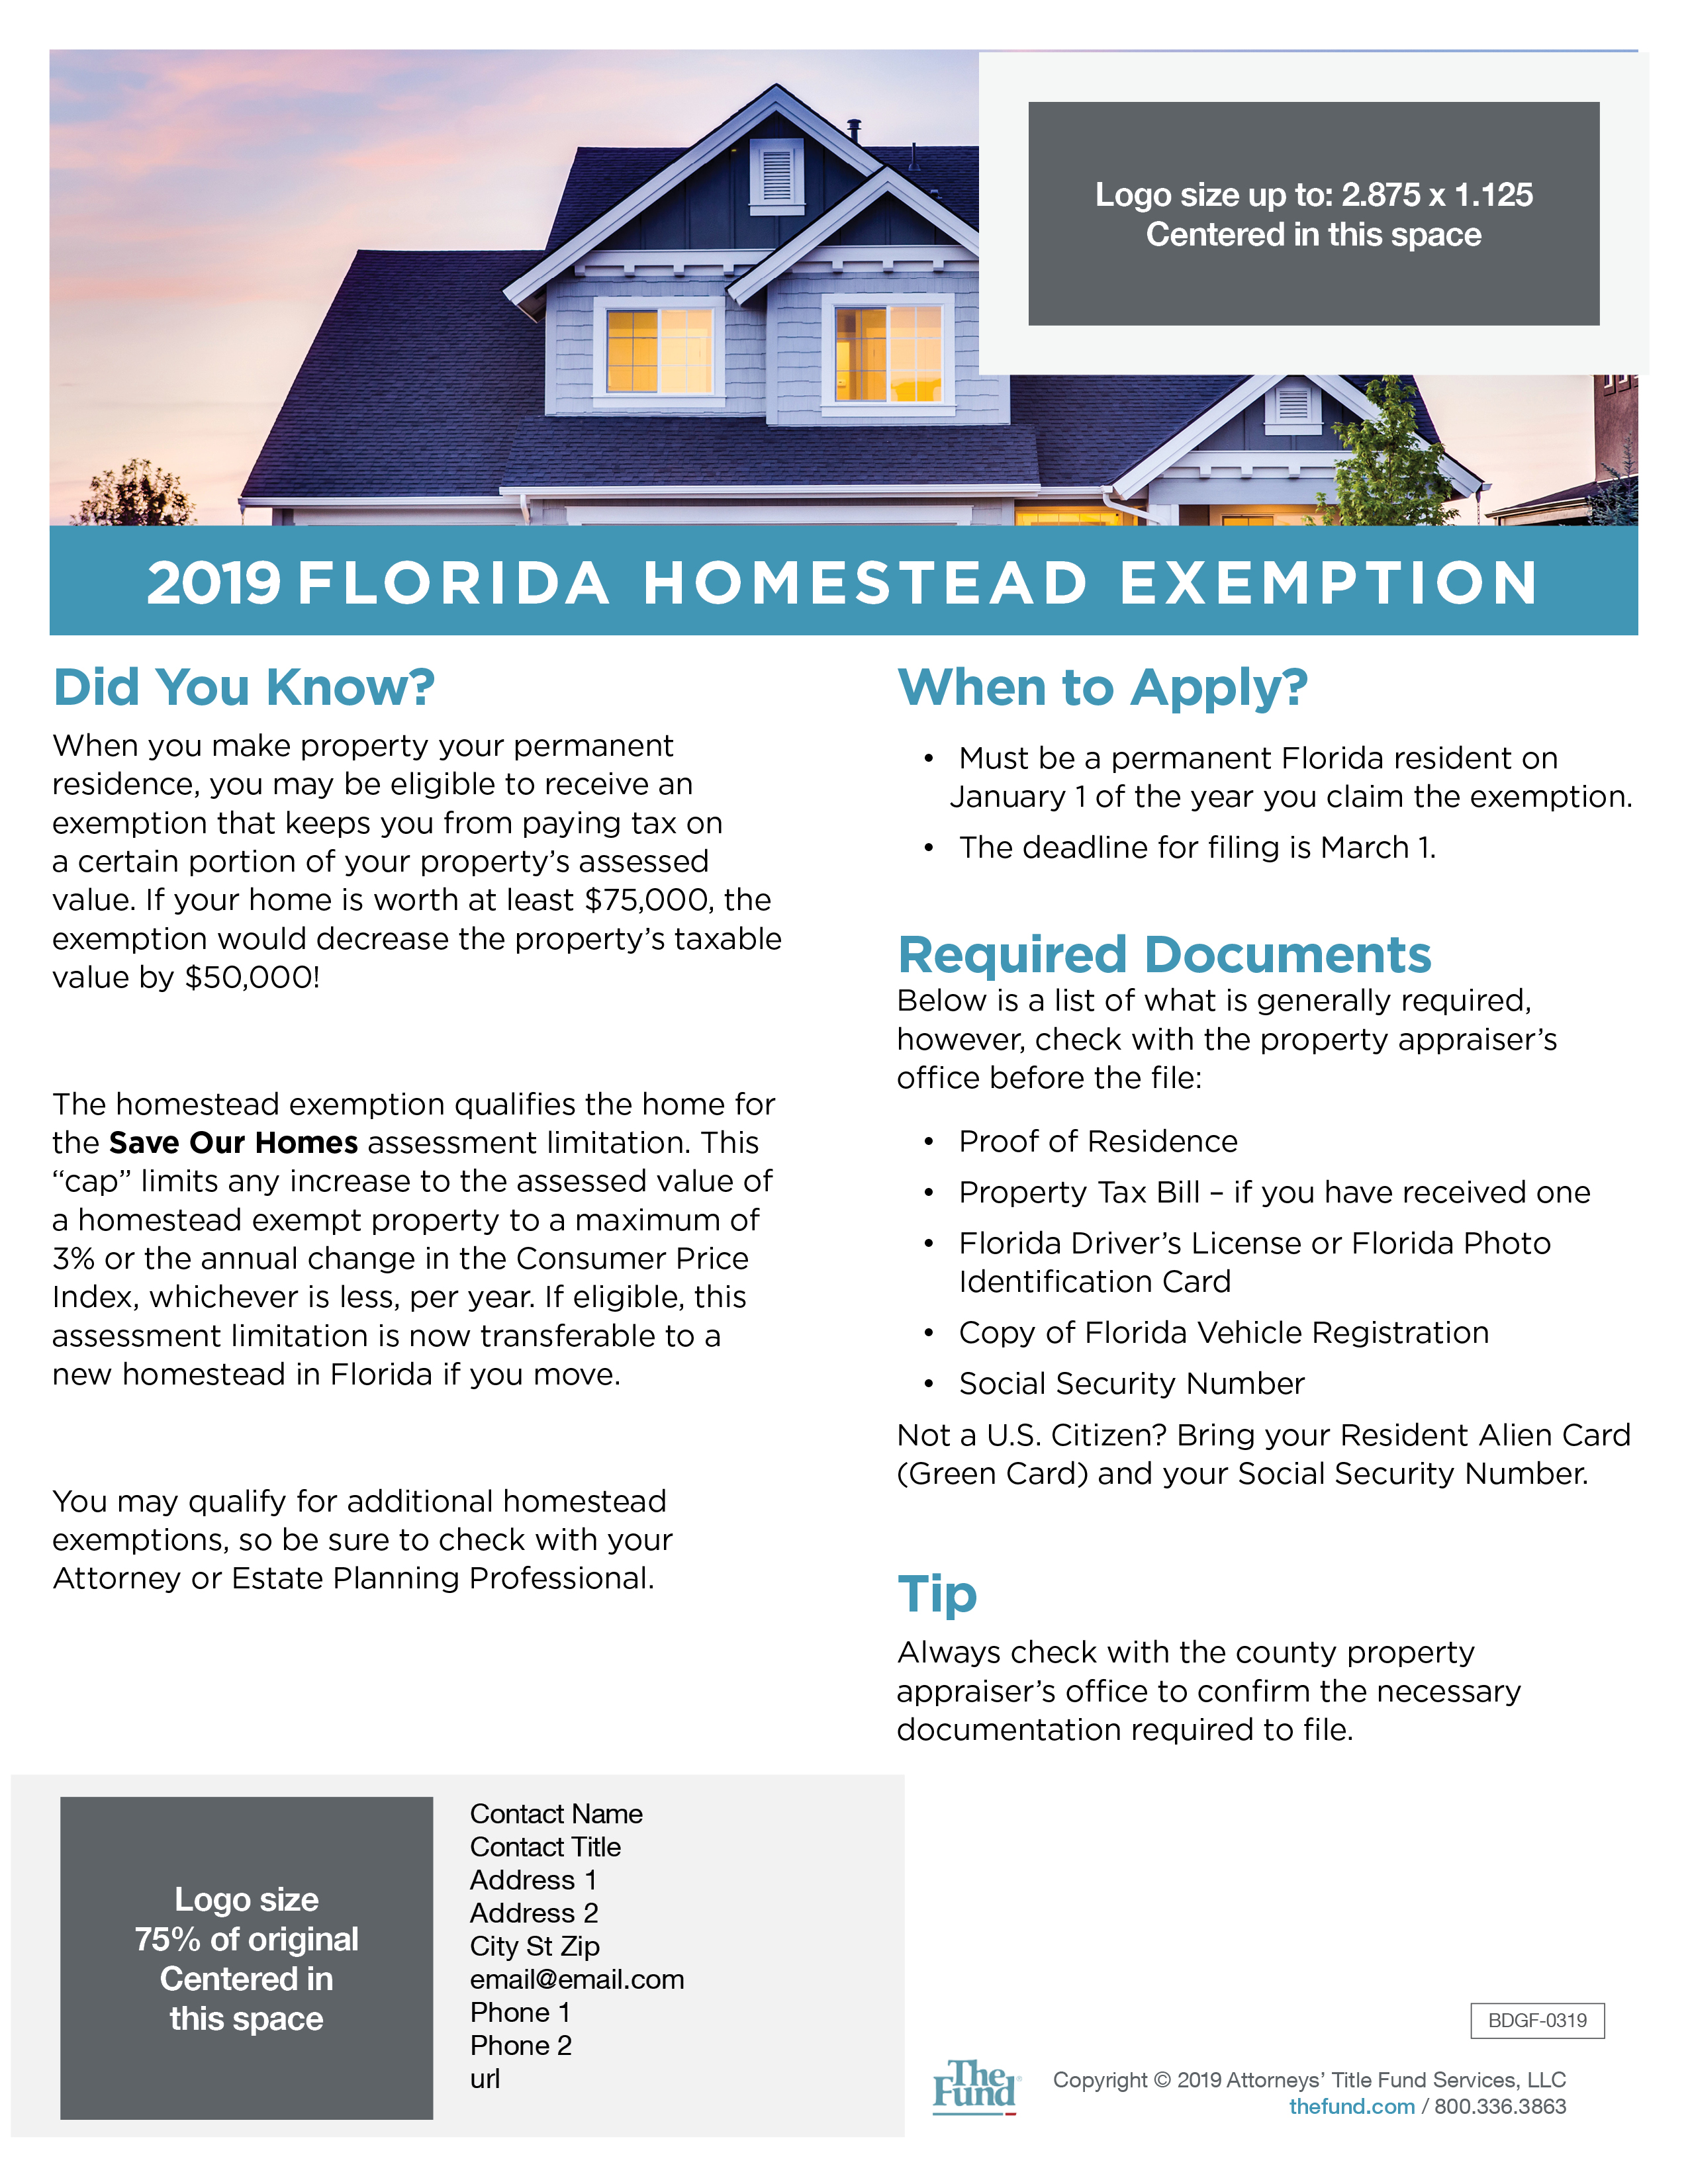 the-fund-2019-florida-homestead-exemption